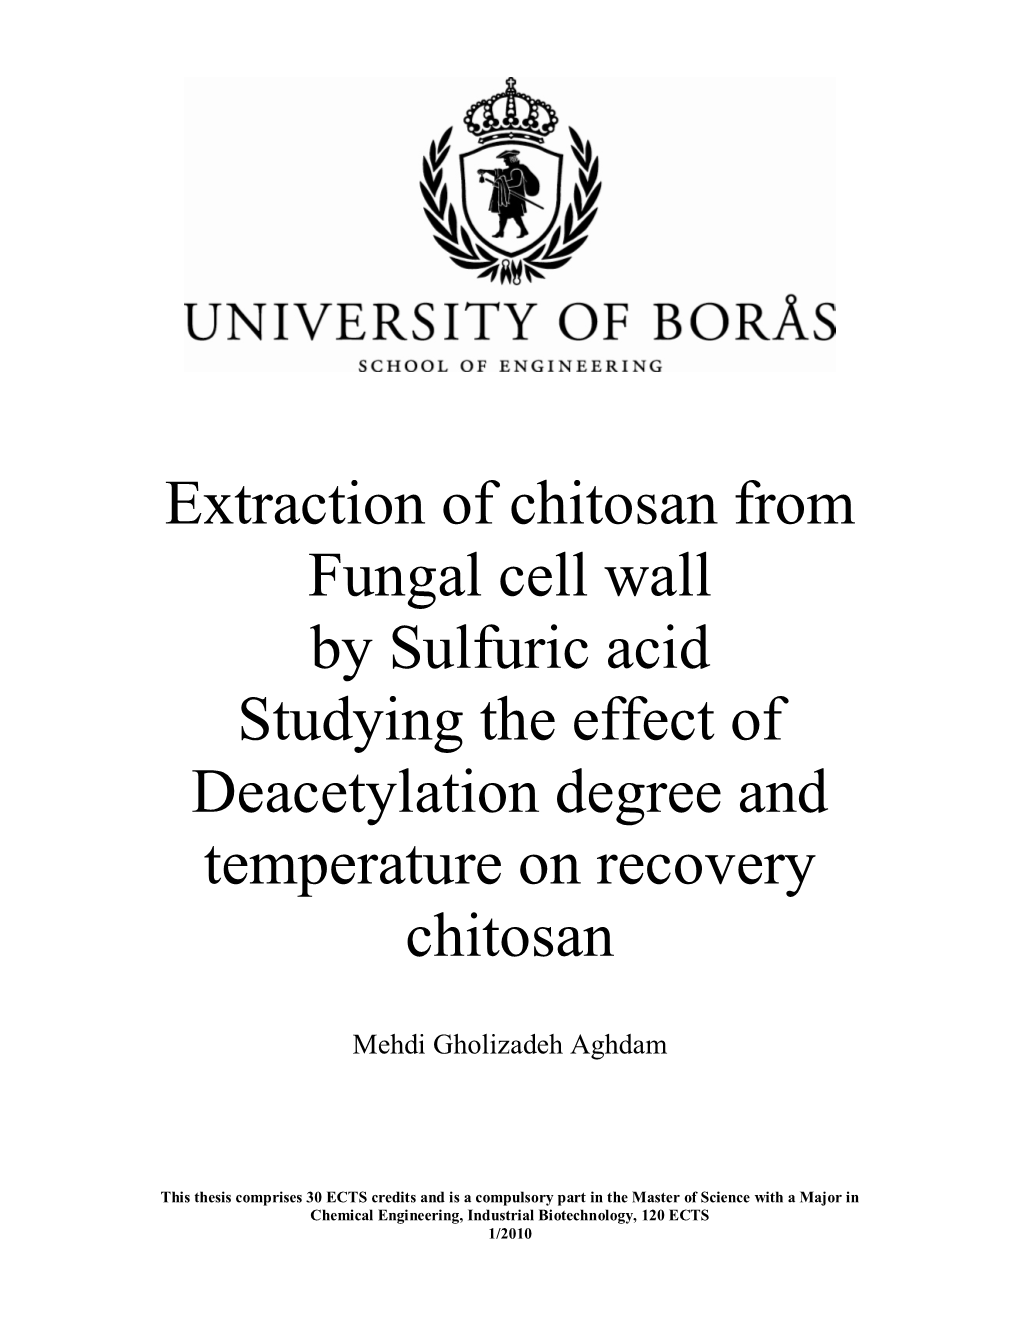 Extraction of Chitosan from Fungal Cell Wall by Sulfuric Acid Studying the Effect of Deacetylation Degree and Temperature on Recovery